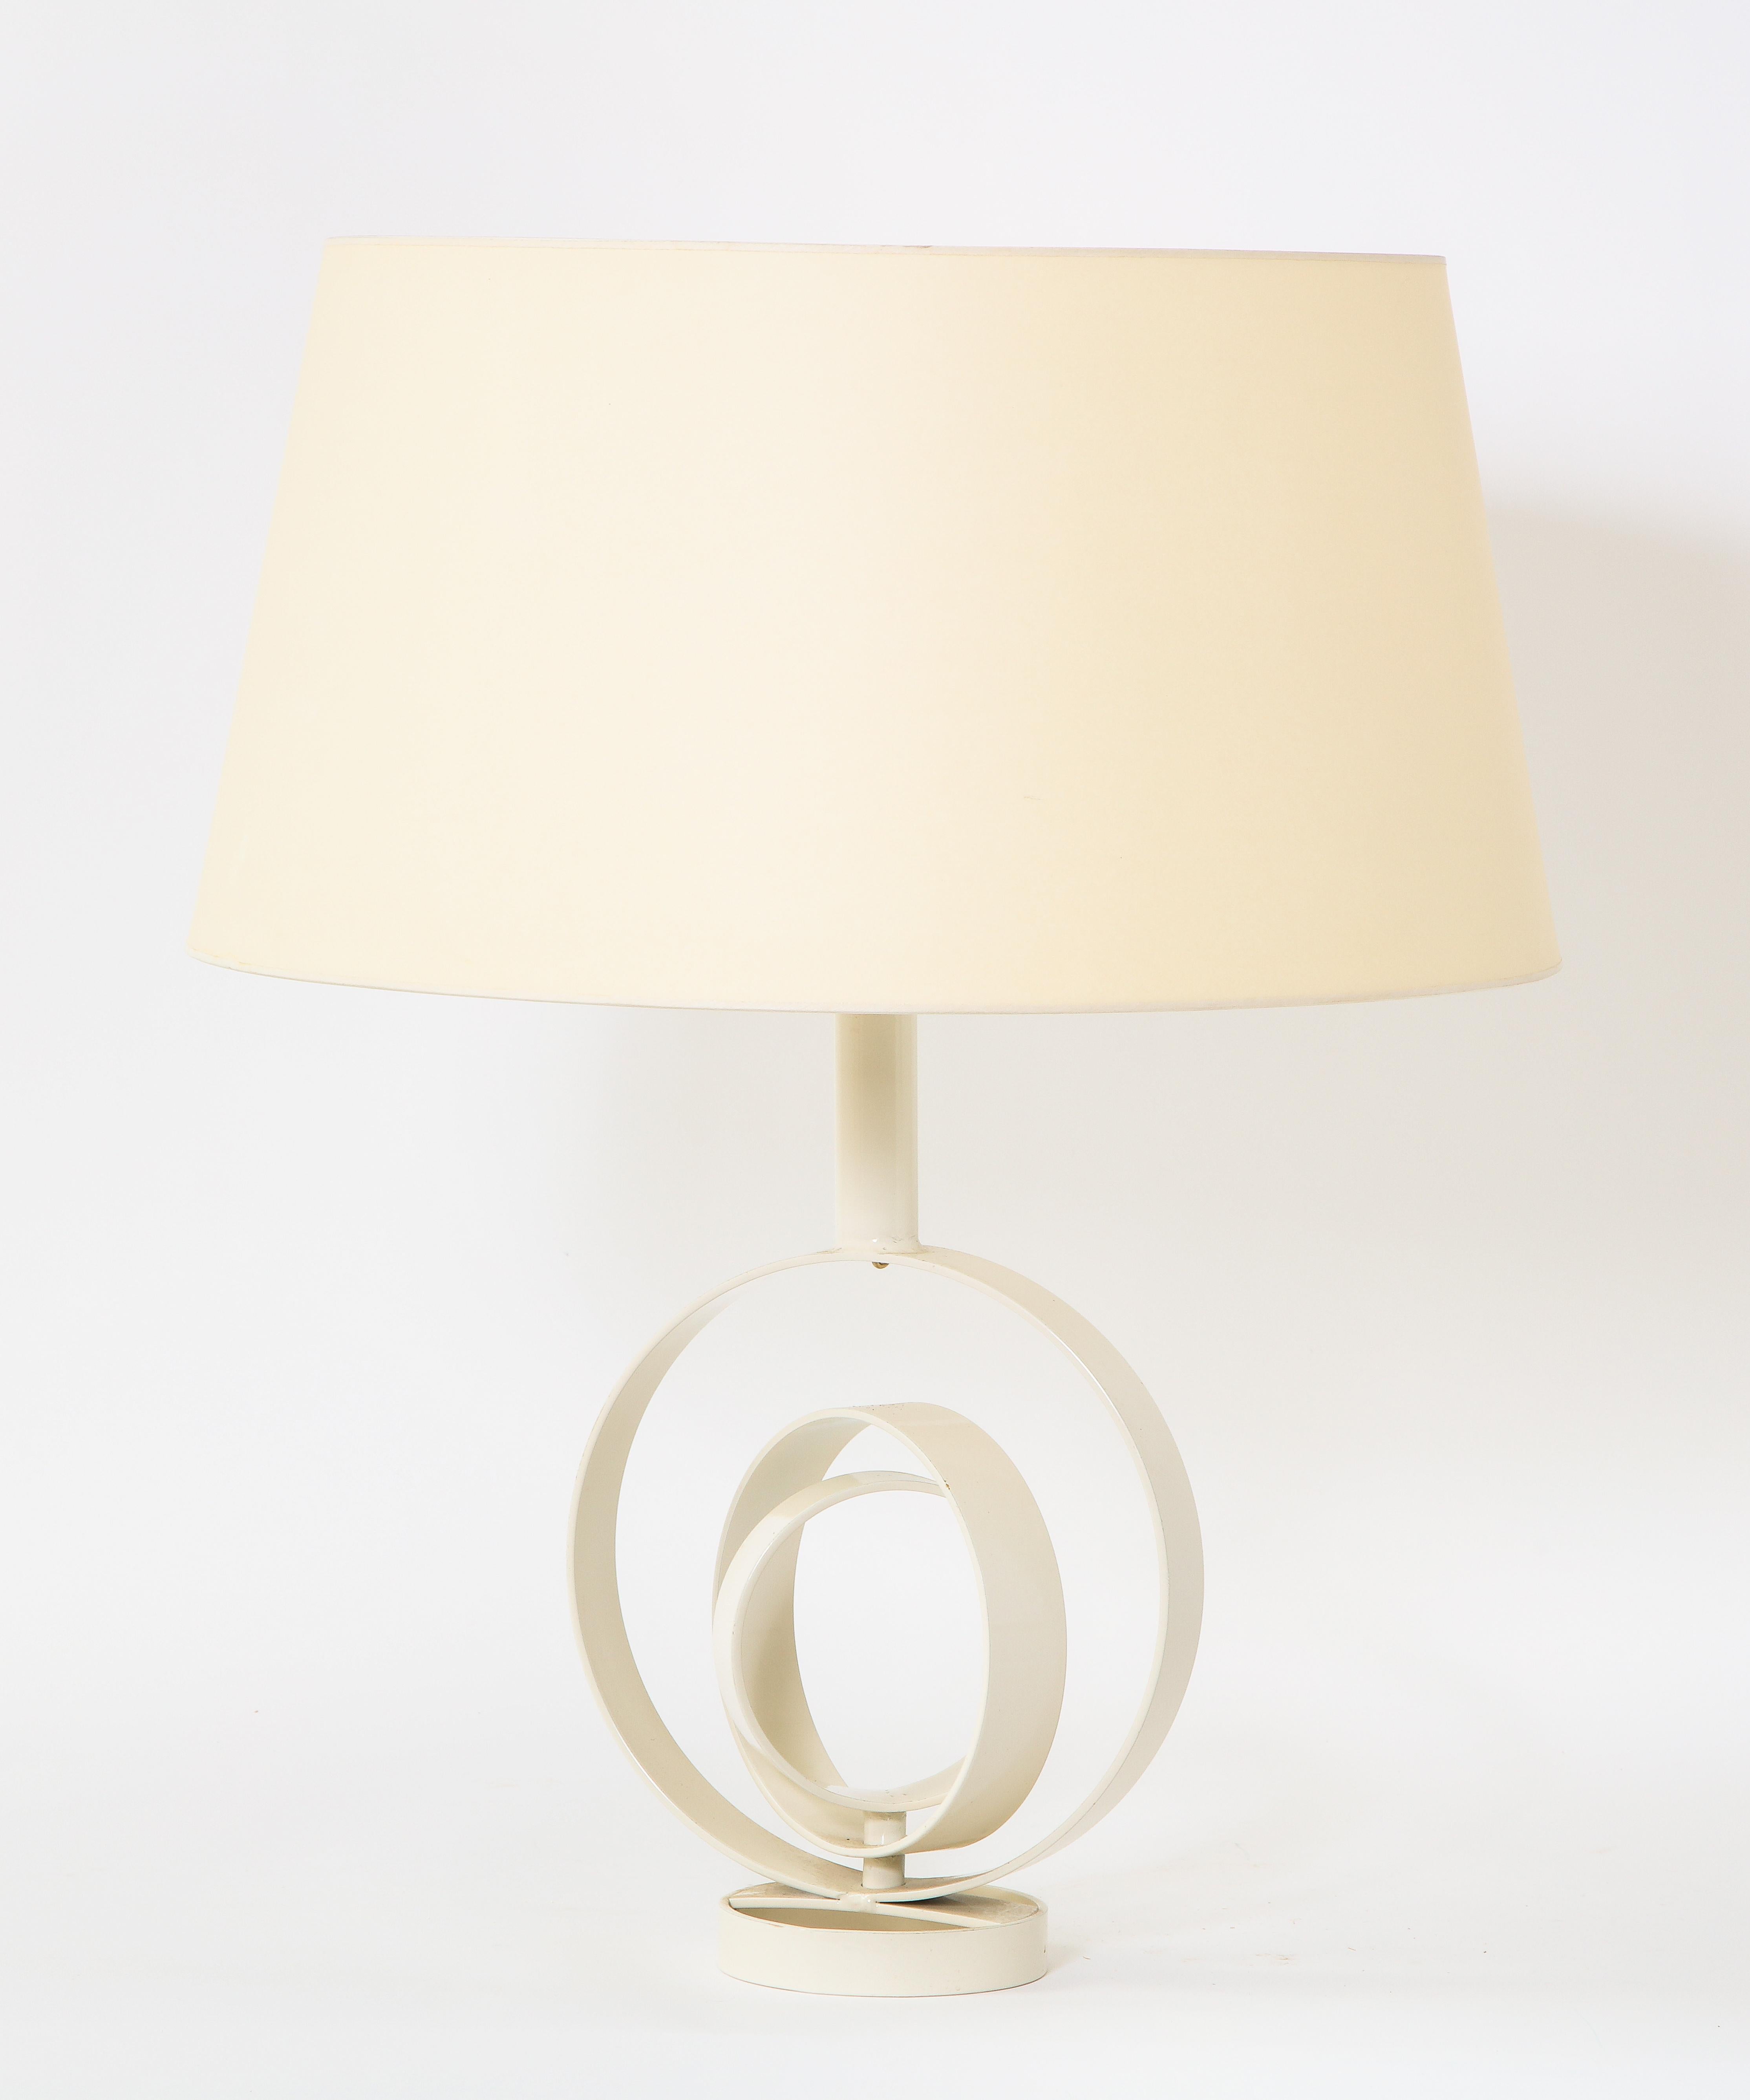 Mid-Century Modern Concentric Ring Painted Metal Table Lamp, France, 1970s For Sale